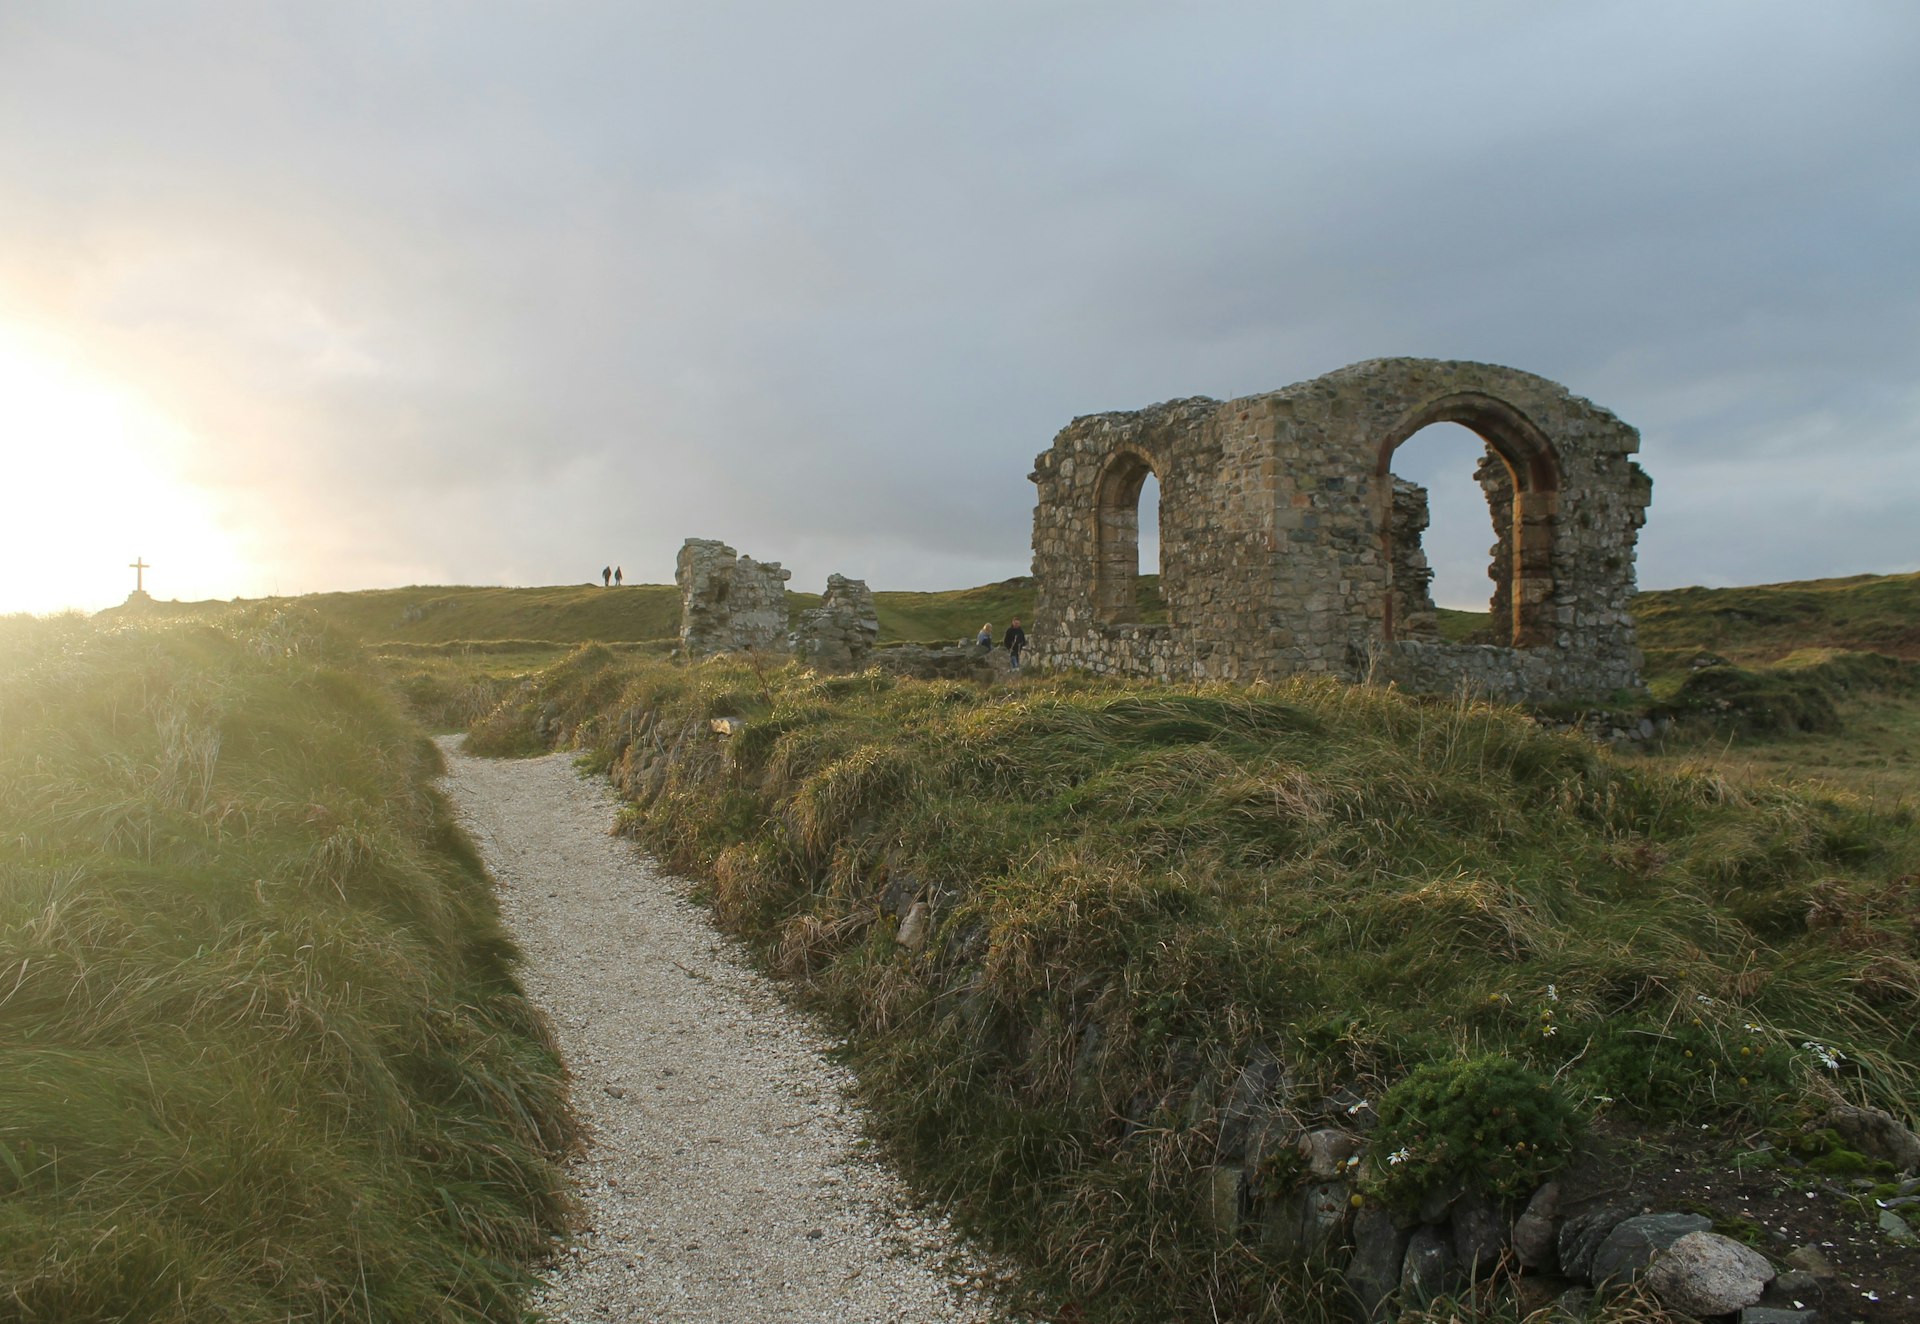 St Dwynwen's Church in Anglesey at sunset. The church is essentially a ruin, with only parts of the walls remaining. Surrounding the church is thick grassland with a narrow walkway to the entrance. 